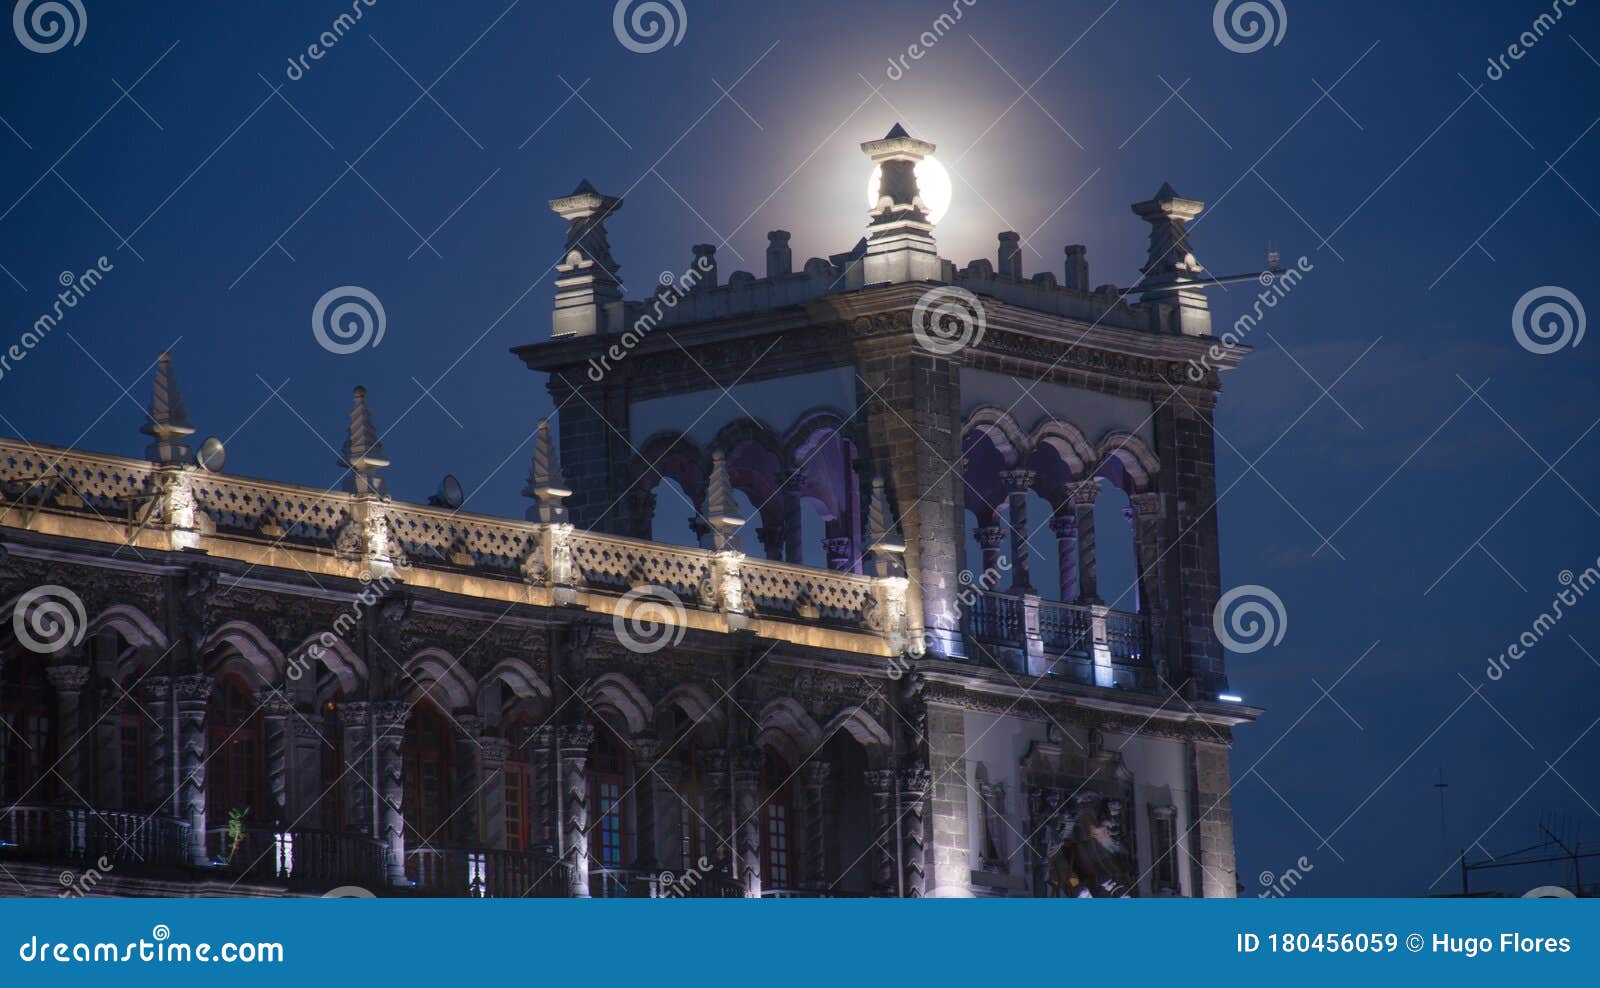 the full moon behind the ancient architecture in a city